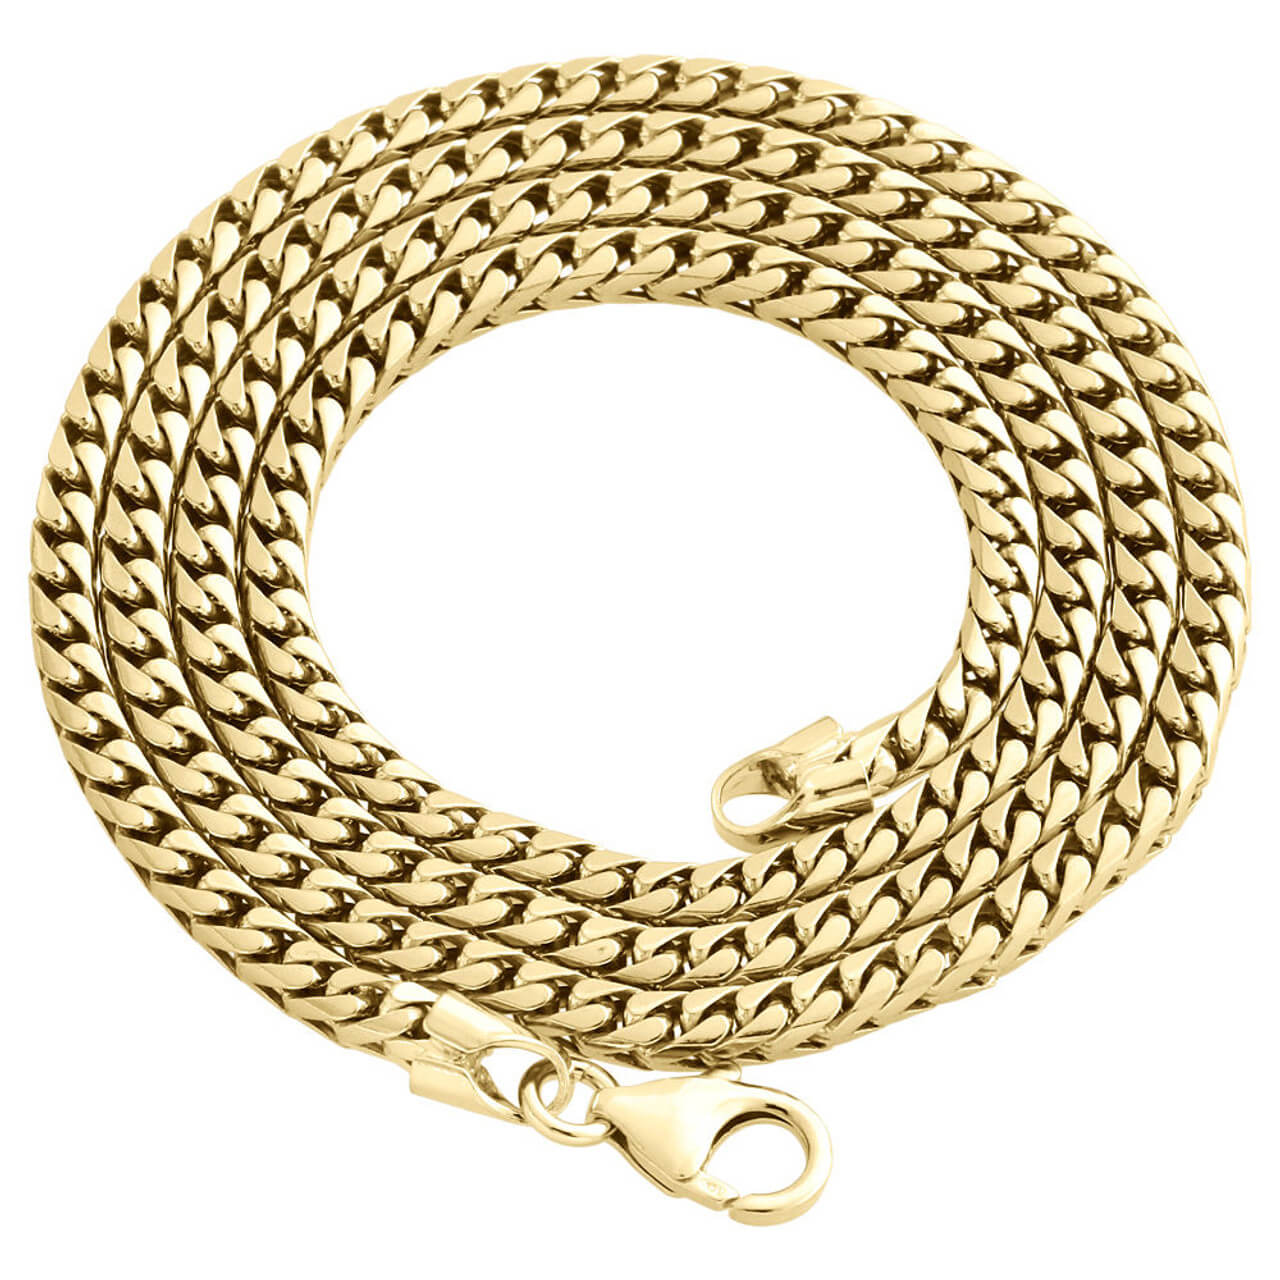 10K Yellow Gold Solid Franco Box Chain Closed Link 3.50mm Necklace 24 - 30 Inches